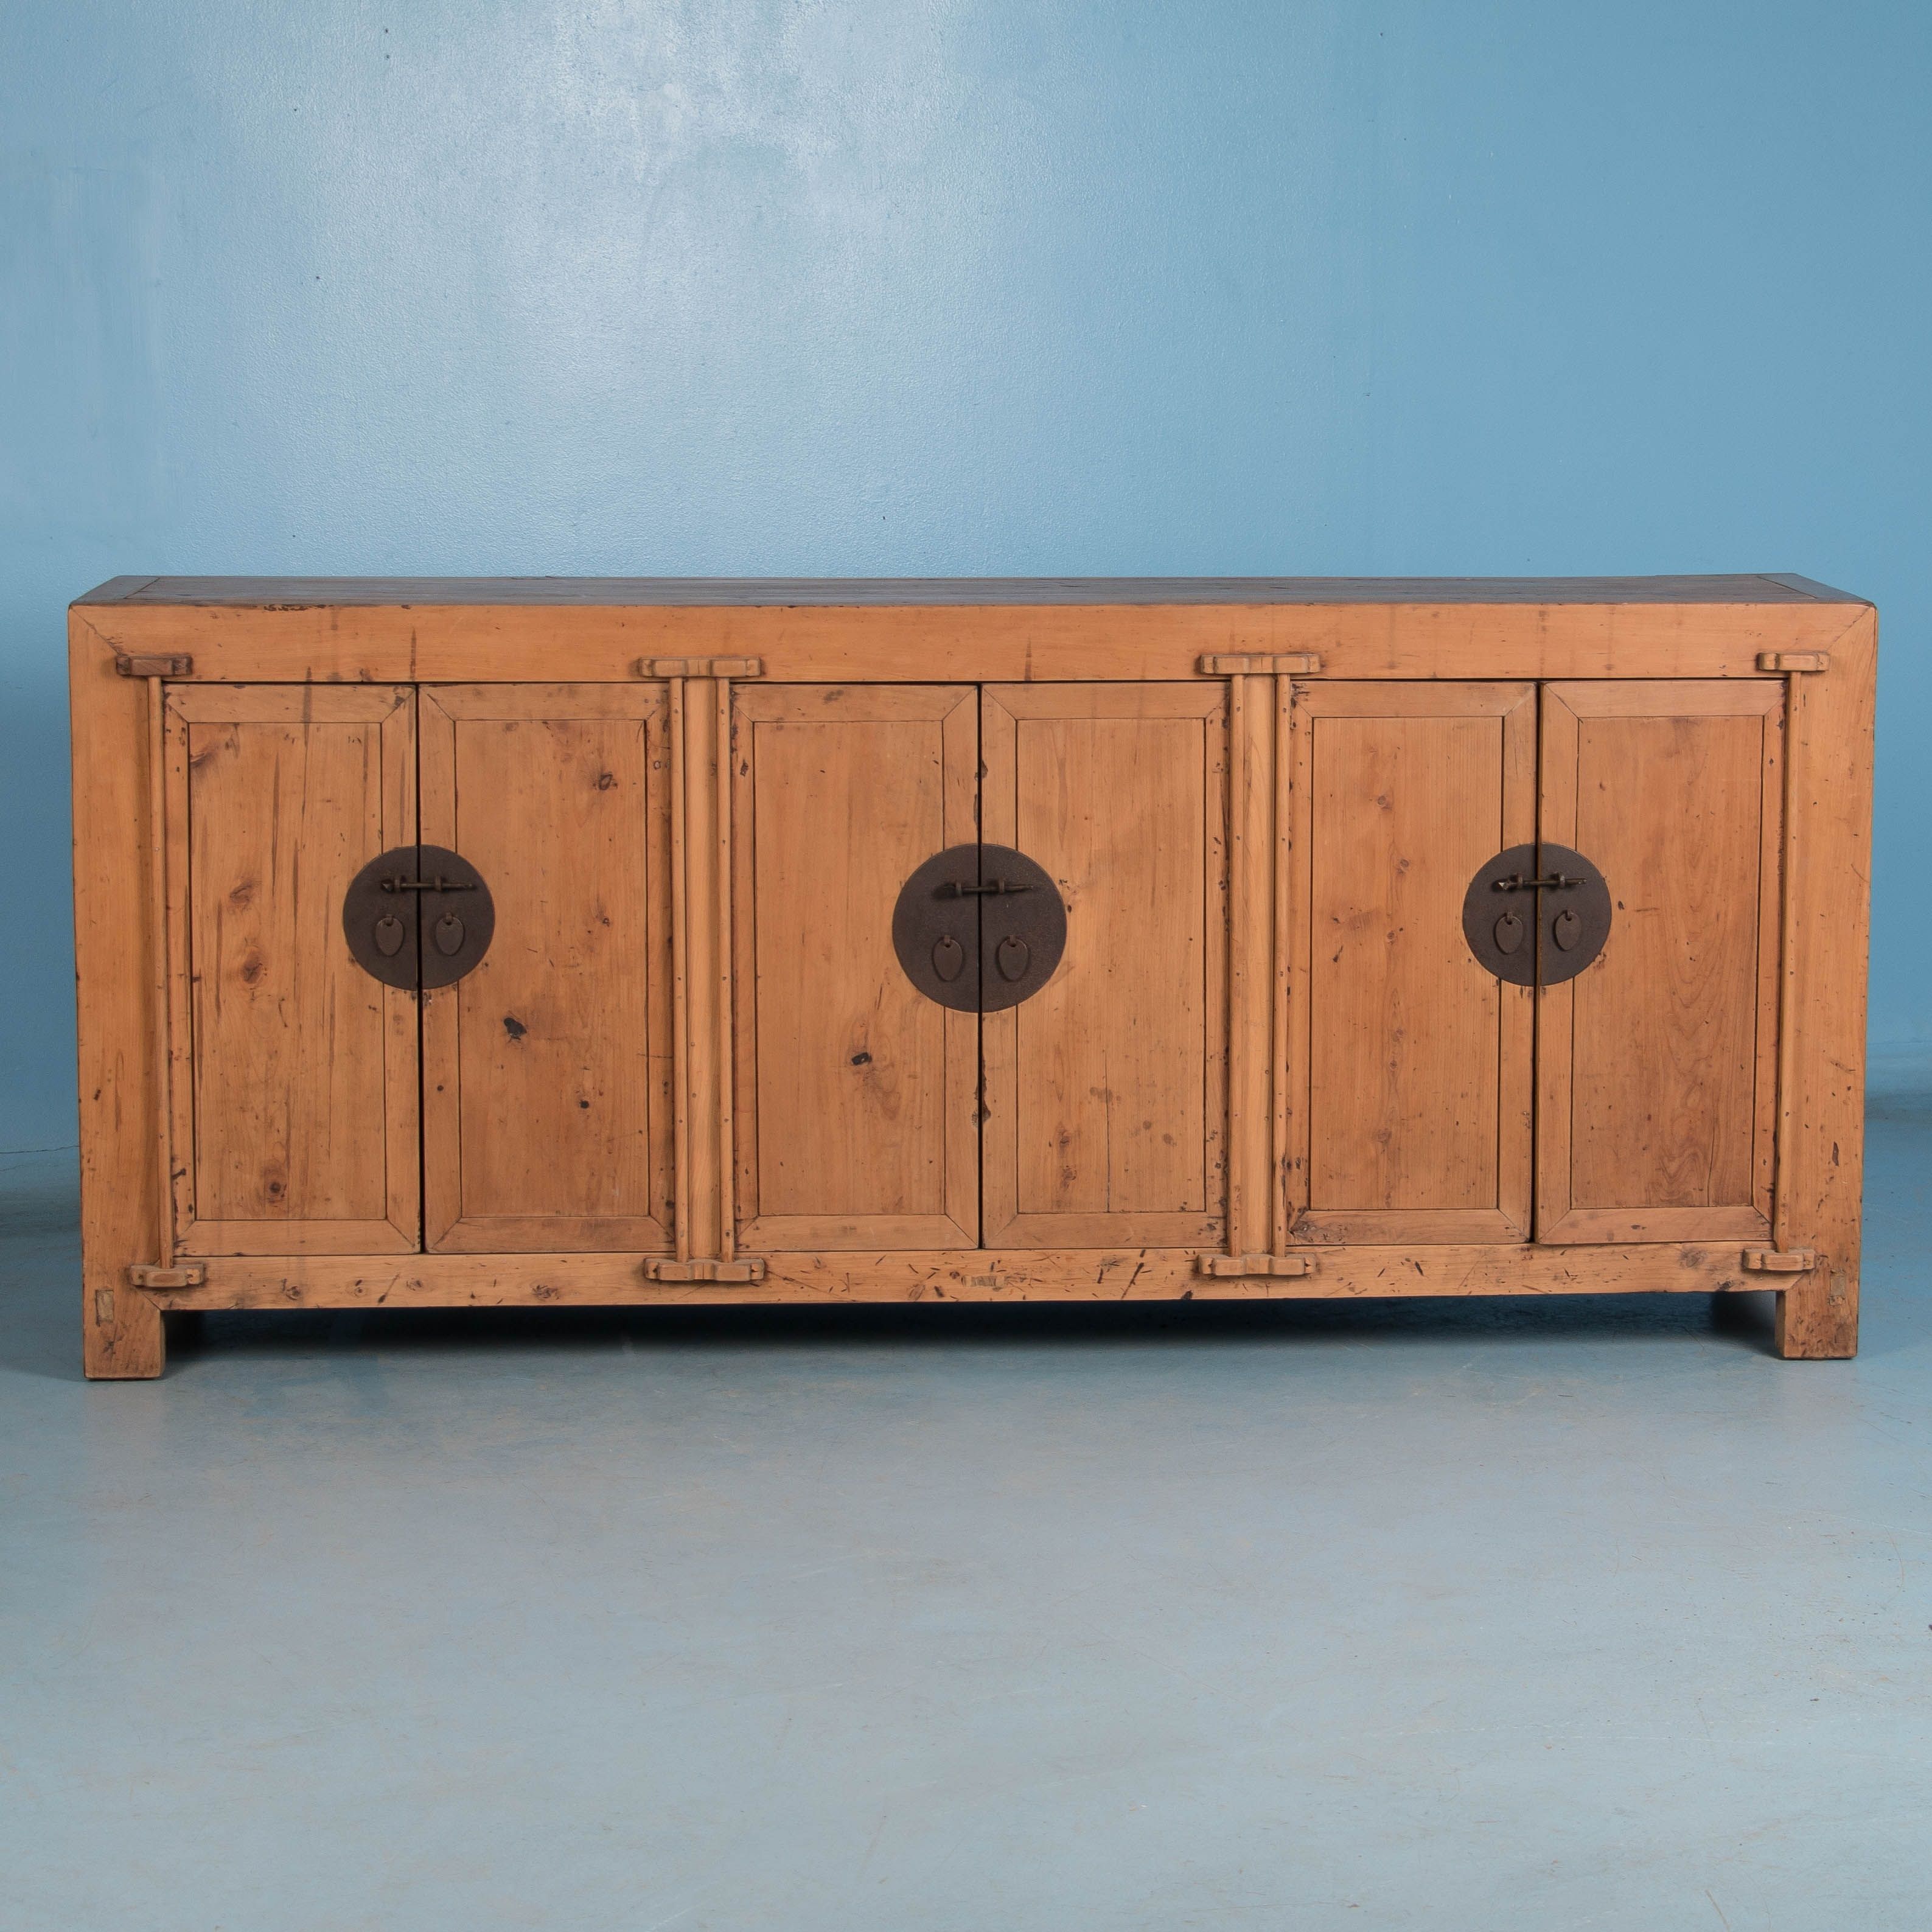 Sideboards | Scandinavian Antiques | Antique Furniture For Sale With Regard To Most Recent Natural Oak Wood 78 Inch Sideboards (View 14 of 20)